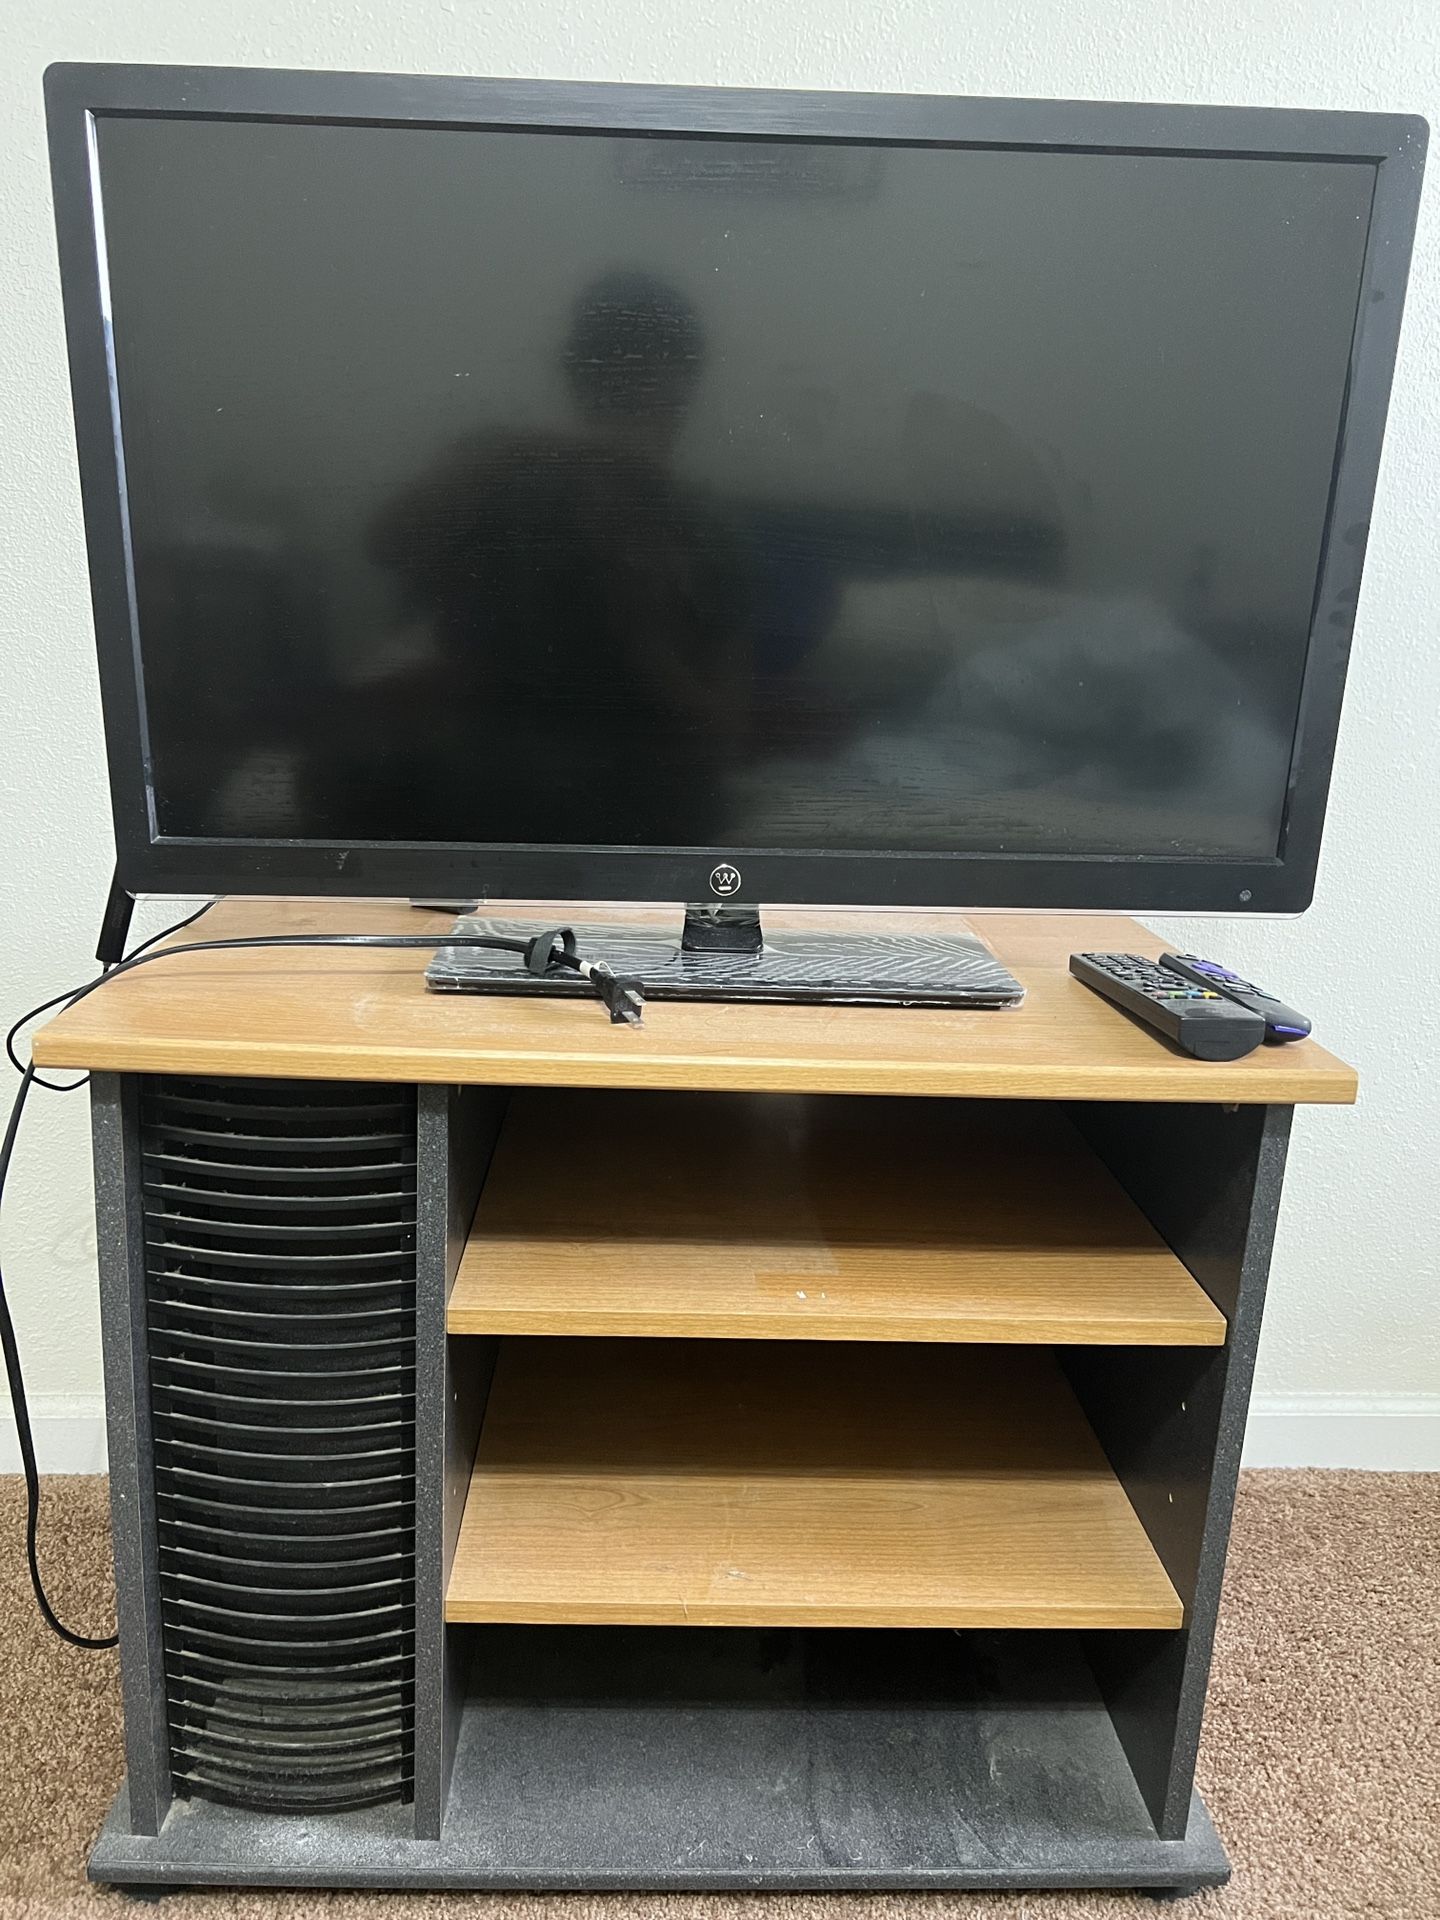 32 Inch Tv With Roku Plug And Play And Voice Remote And Solid Wood Stand 